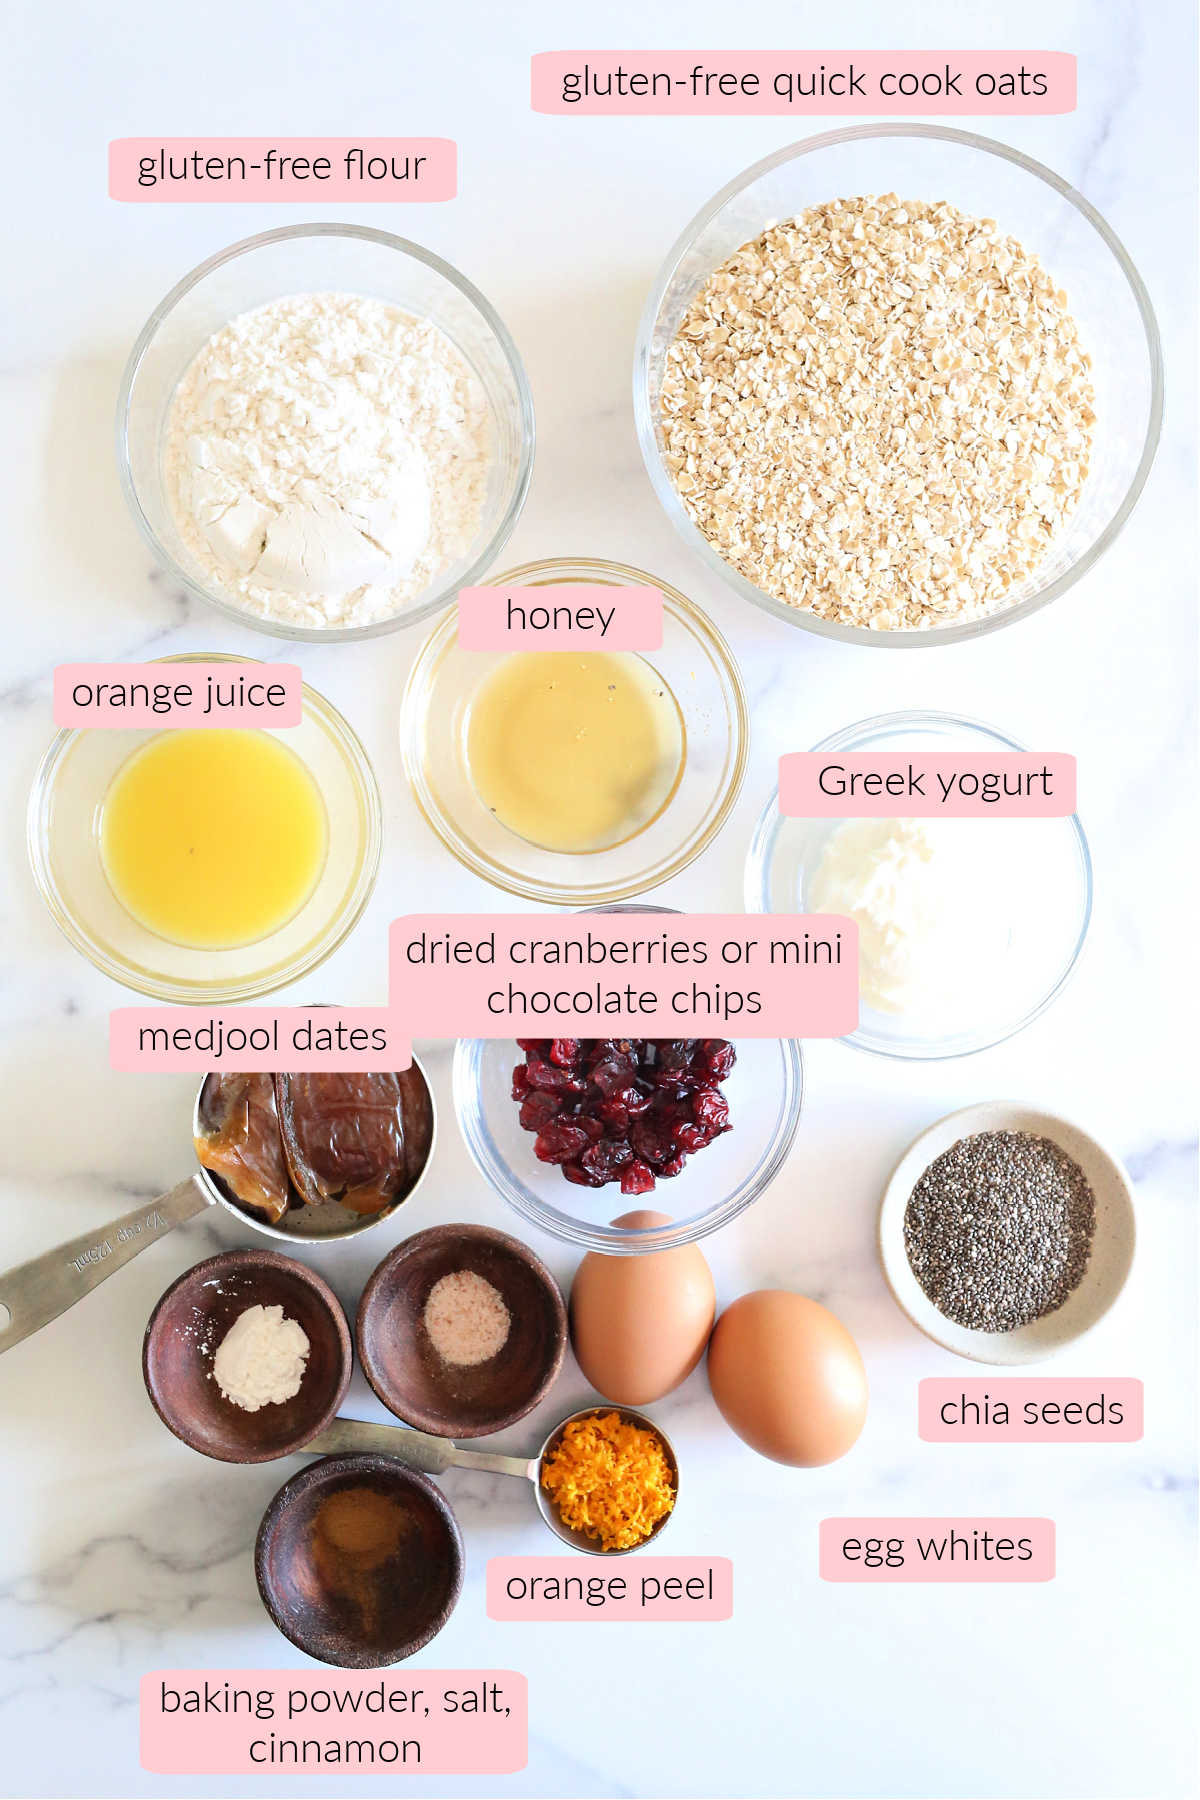 ingredients for homemade oatcakes recipe made of oats in the shape of a cookie or patty